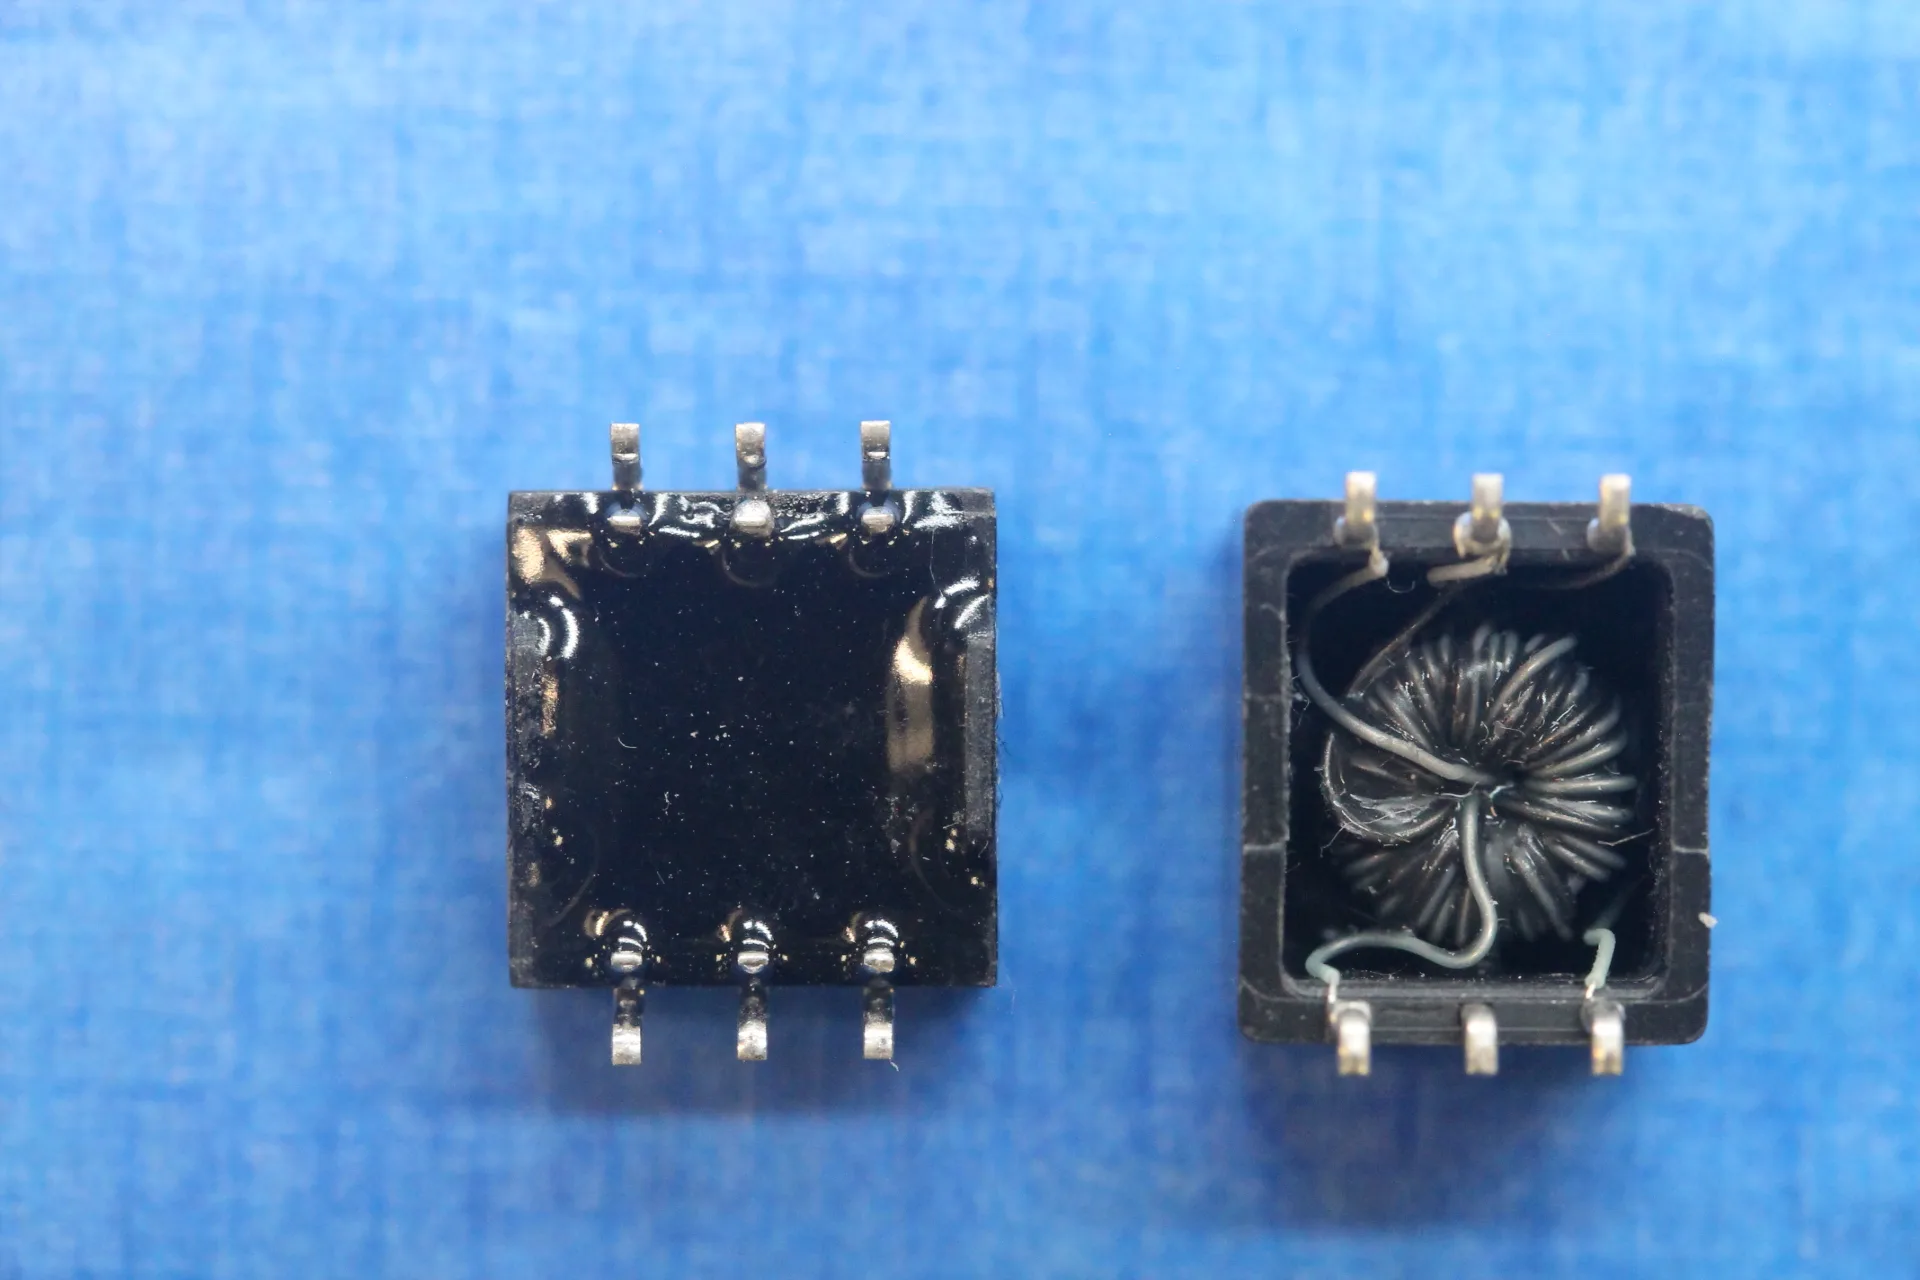 Two electronic components showing the underneath of the parts. One has been completely covered over, while the other shows a coil of wire.